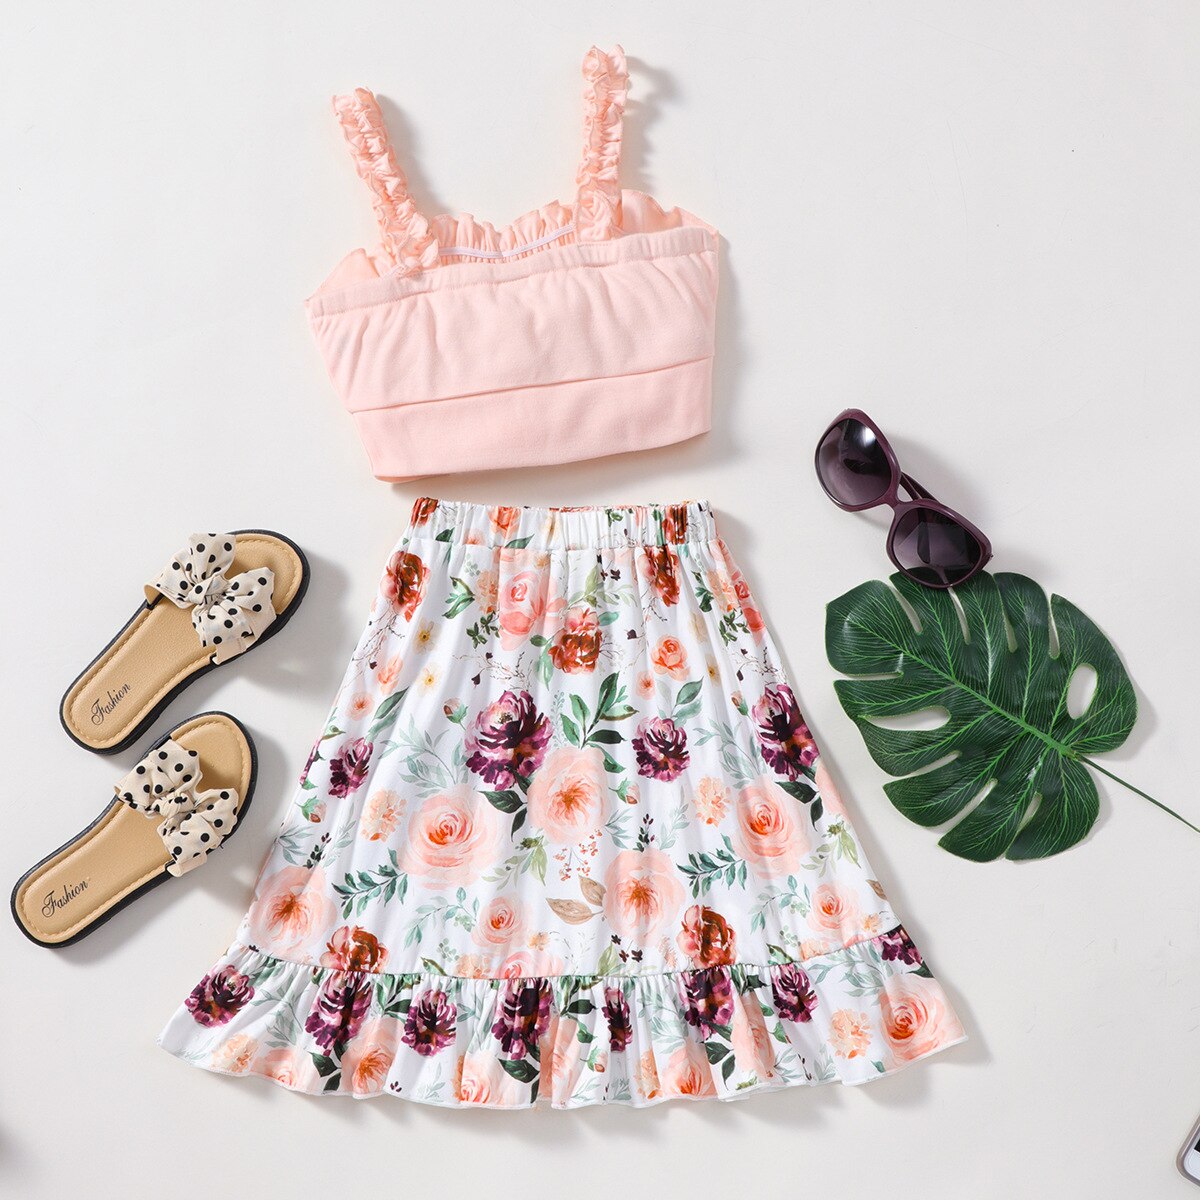 Children-Kid-Girls-Clothes-Set-Bow-Camisole-Floral-Skirt-Two-Piece-Outfits-Fashion-Cute-Toddler-Princess-1